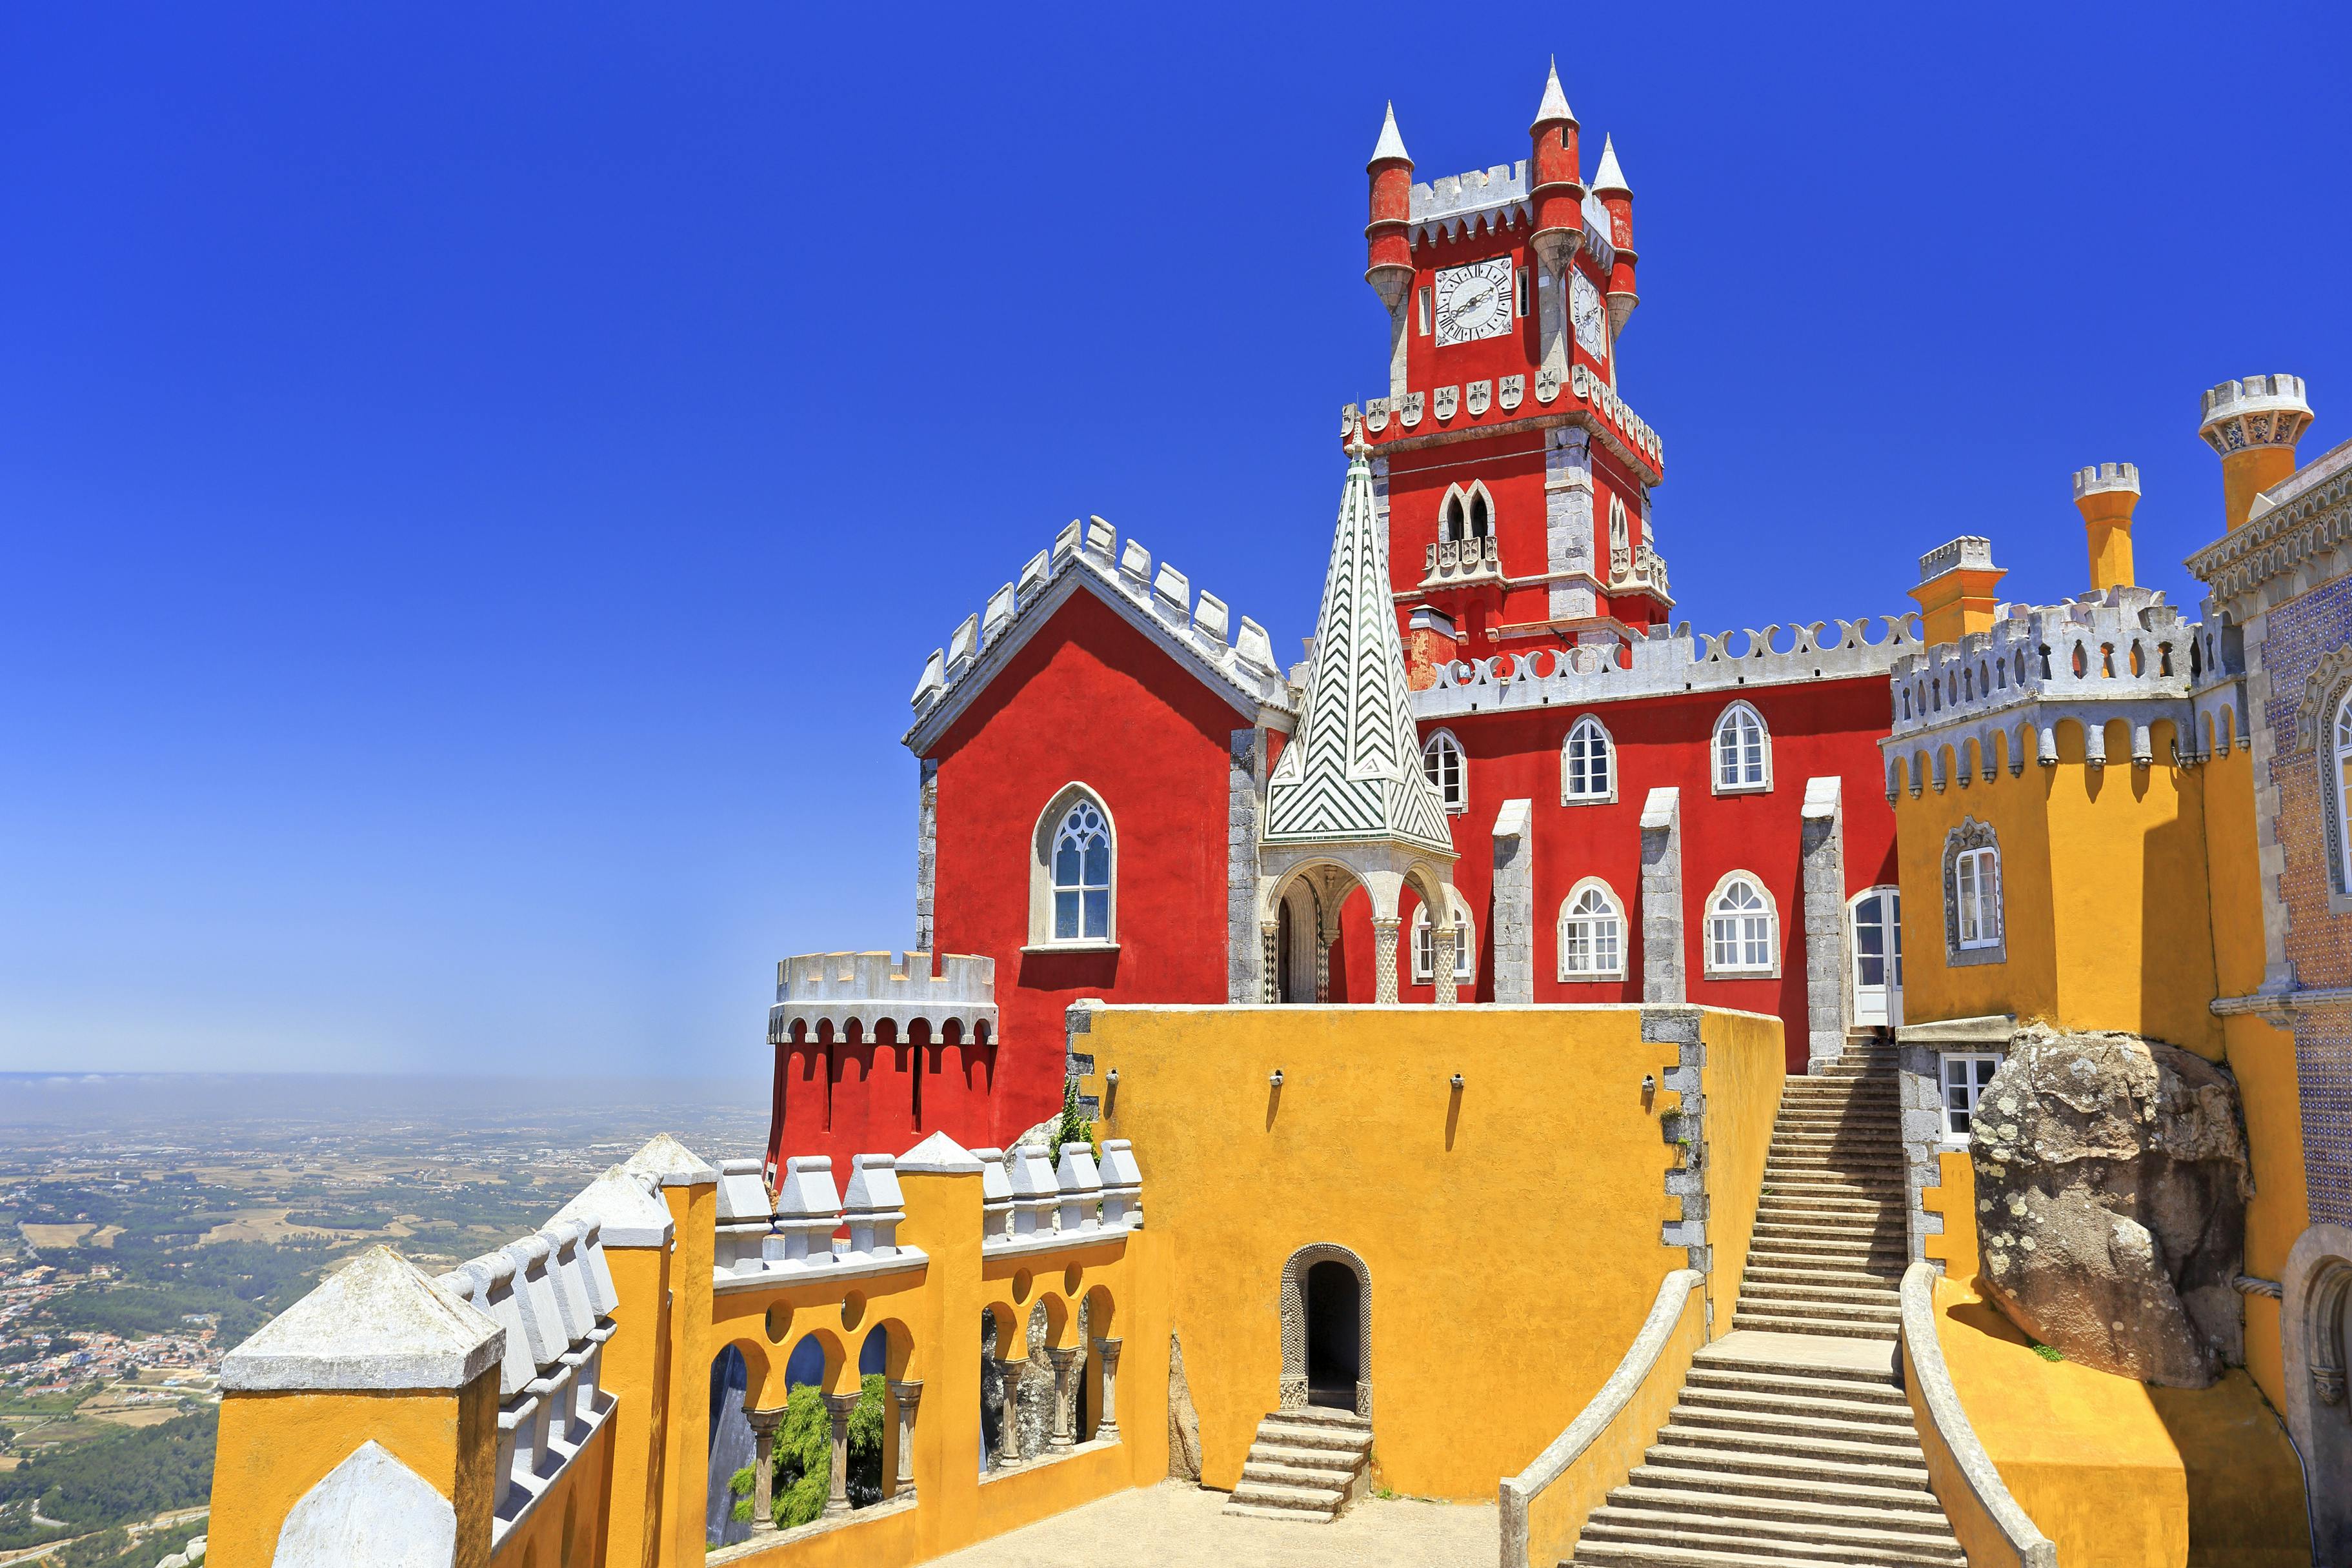 Sintra, Cascais and Pena Palace guided tour from Lisbon